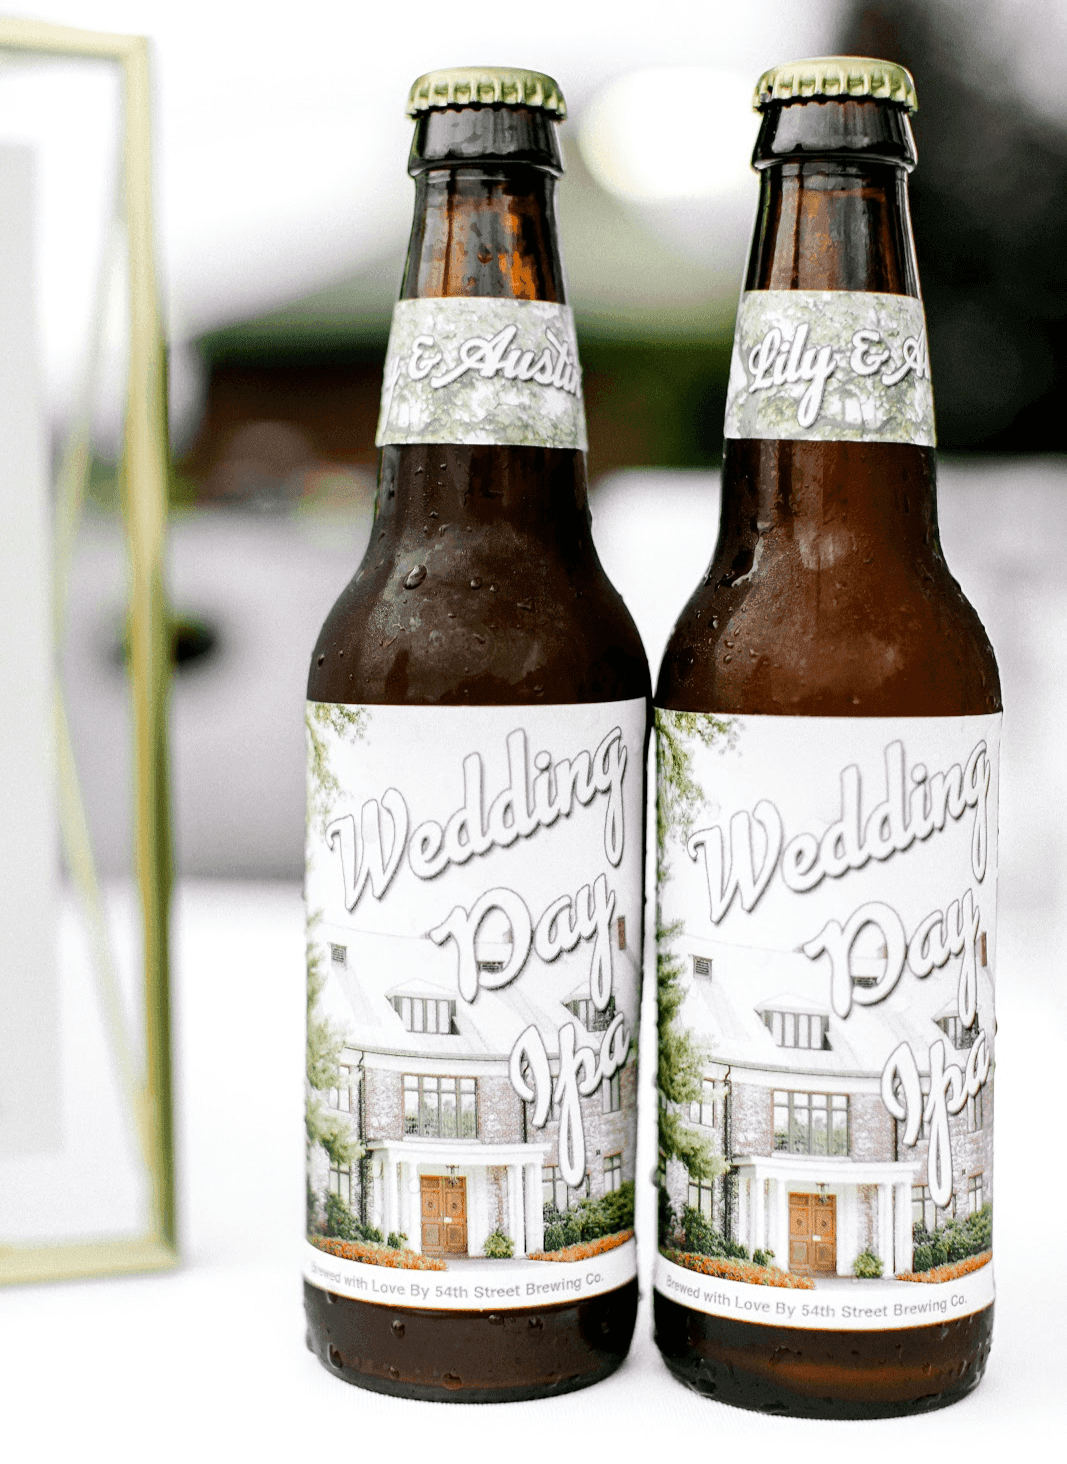 Customized beer labels that read "Wedding Day IPA"